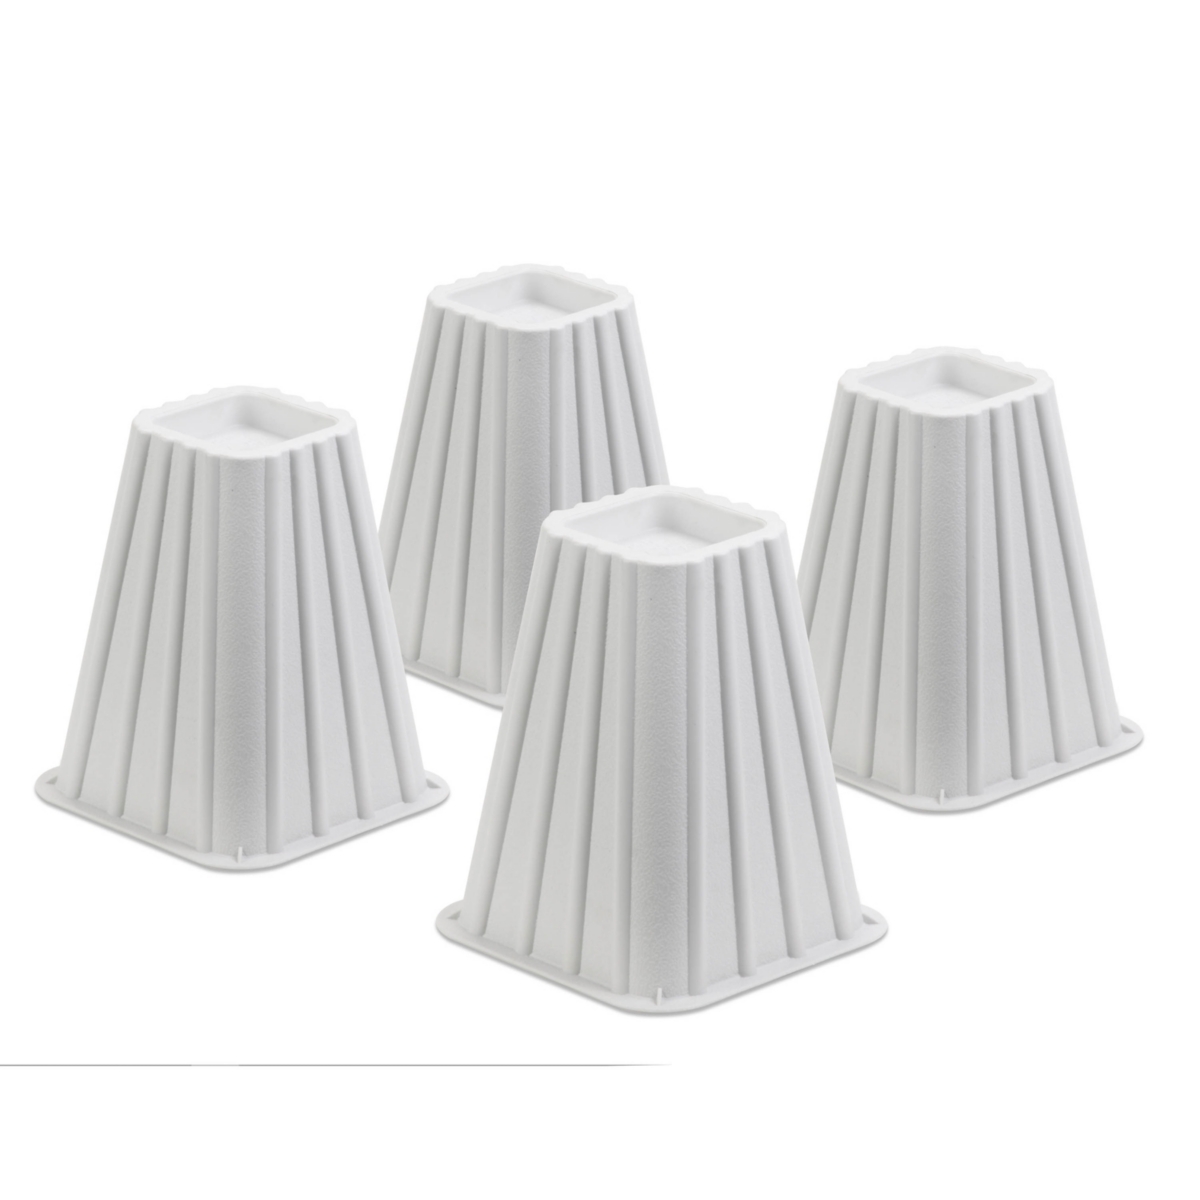 8" Square Bed Risers, Set of 4 - White